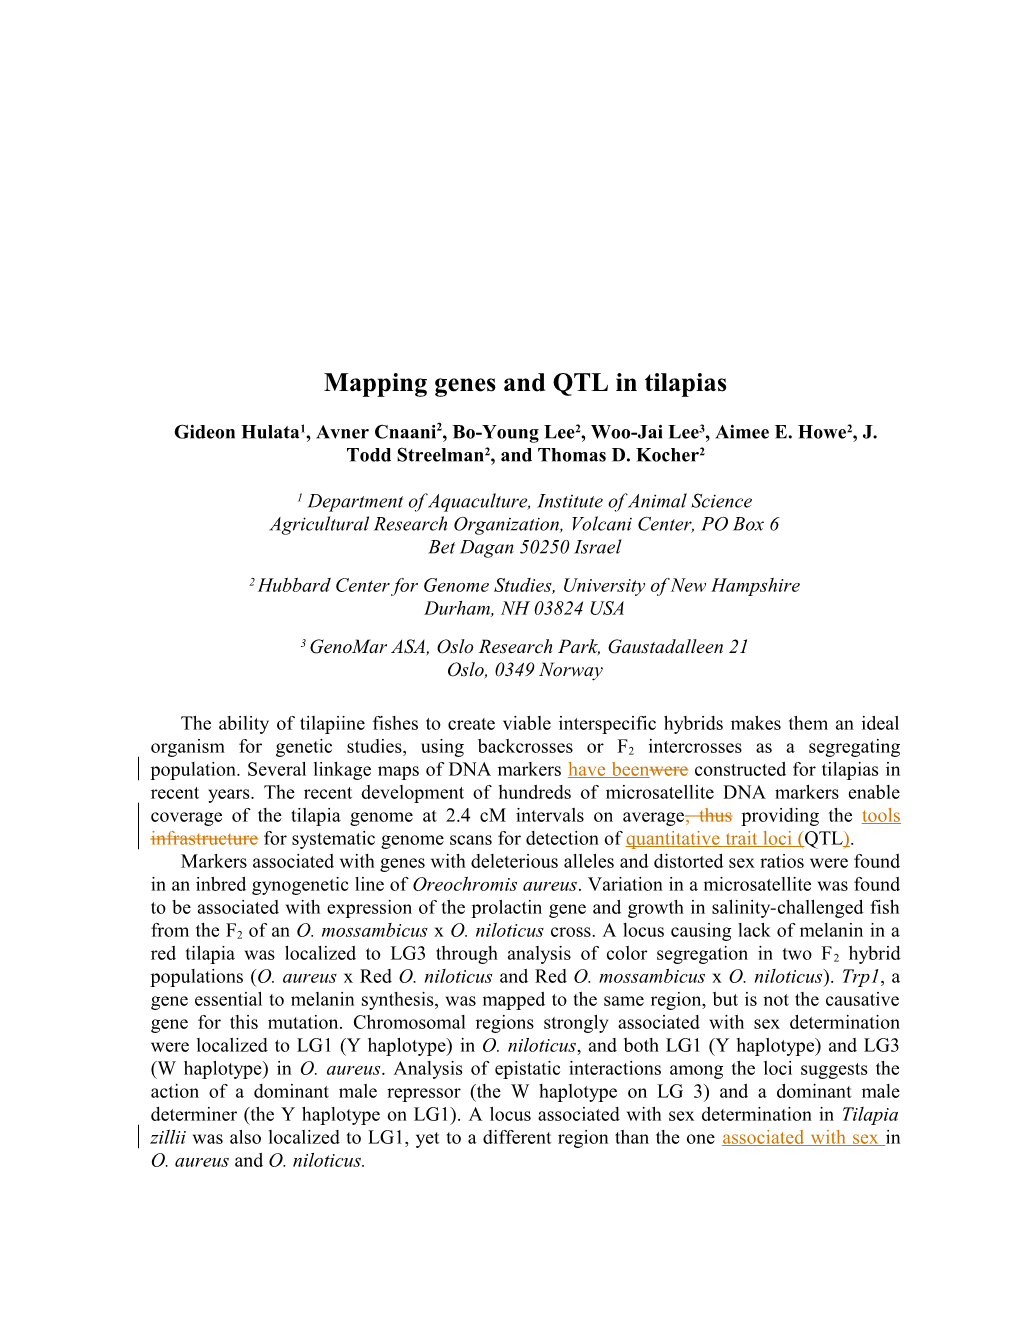 Mapping QTL and Genes in Tilapias